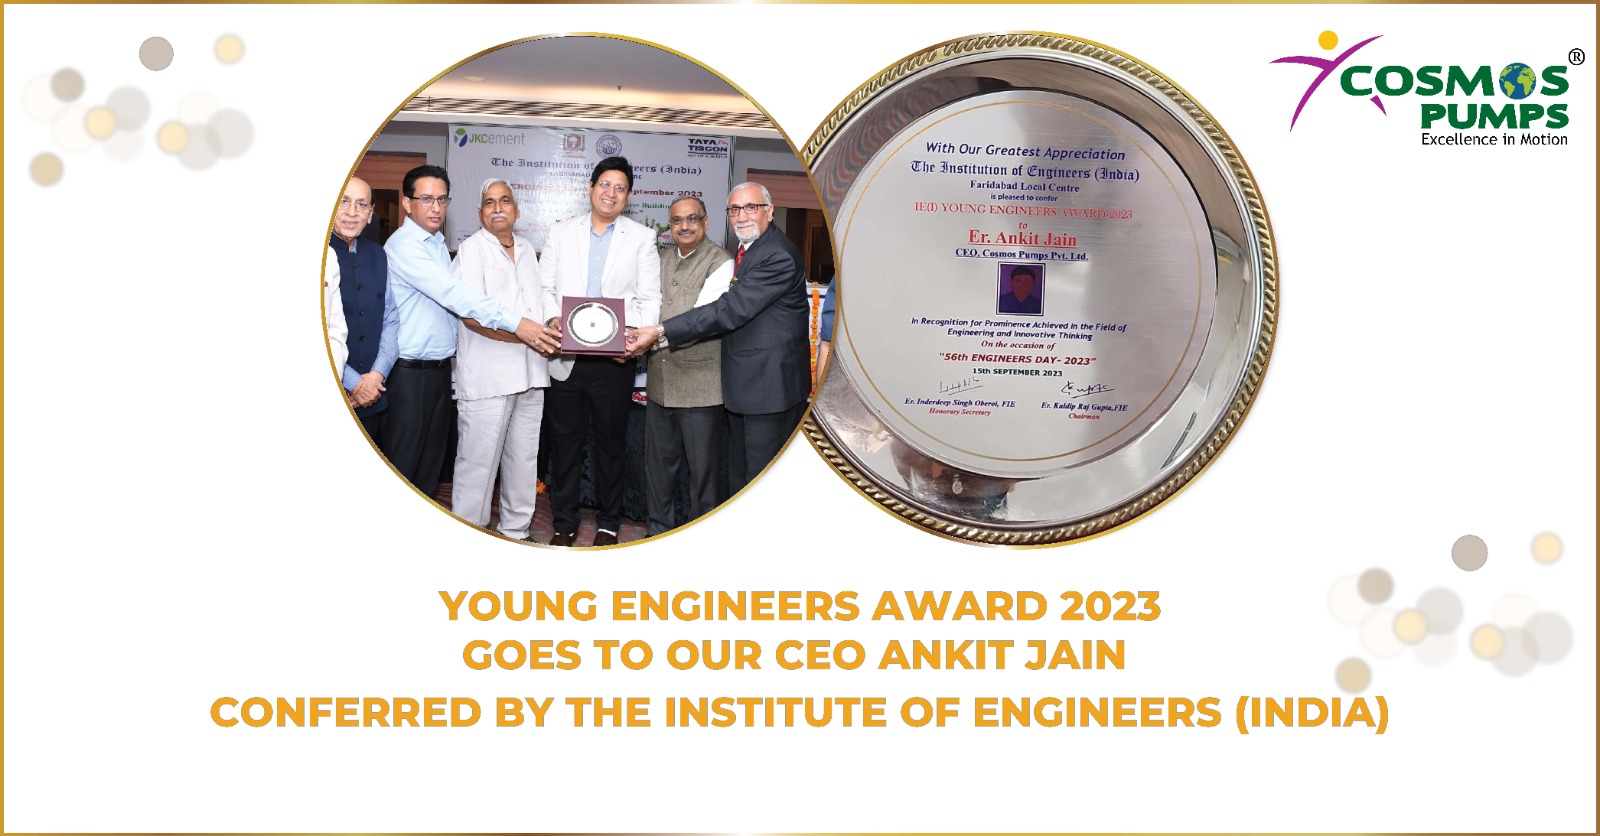 Ankit Jain, CEO of Cosmos Pumps Private Limited, Honored with Young Engineers Award 2023